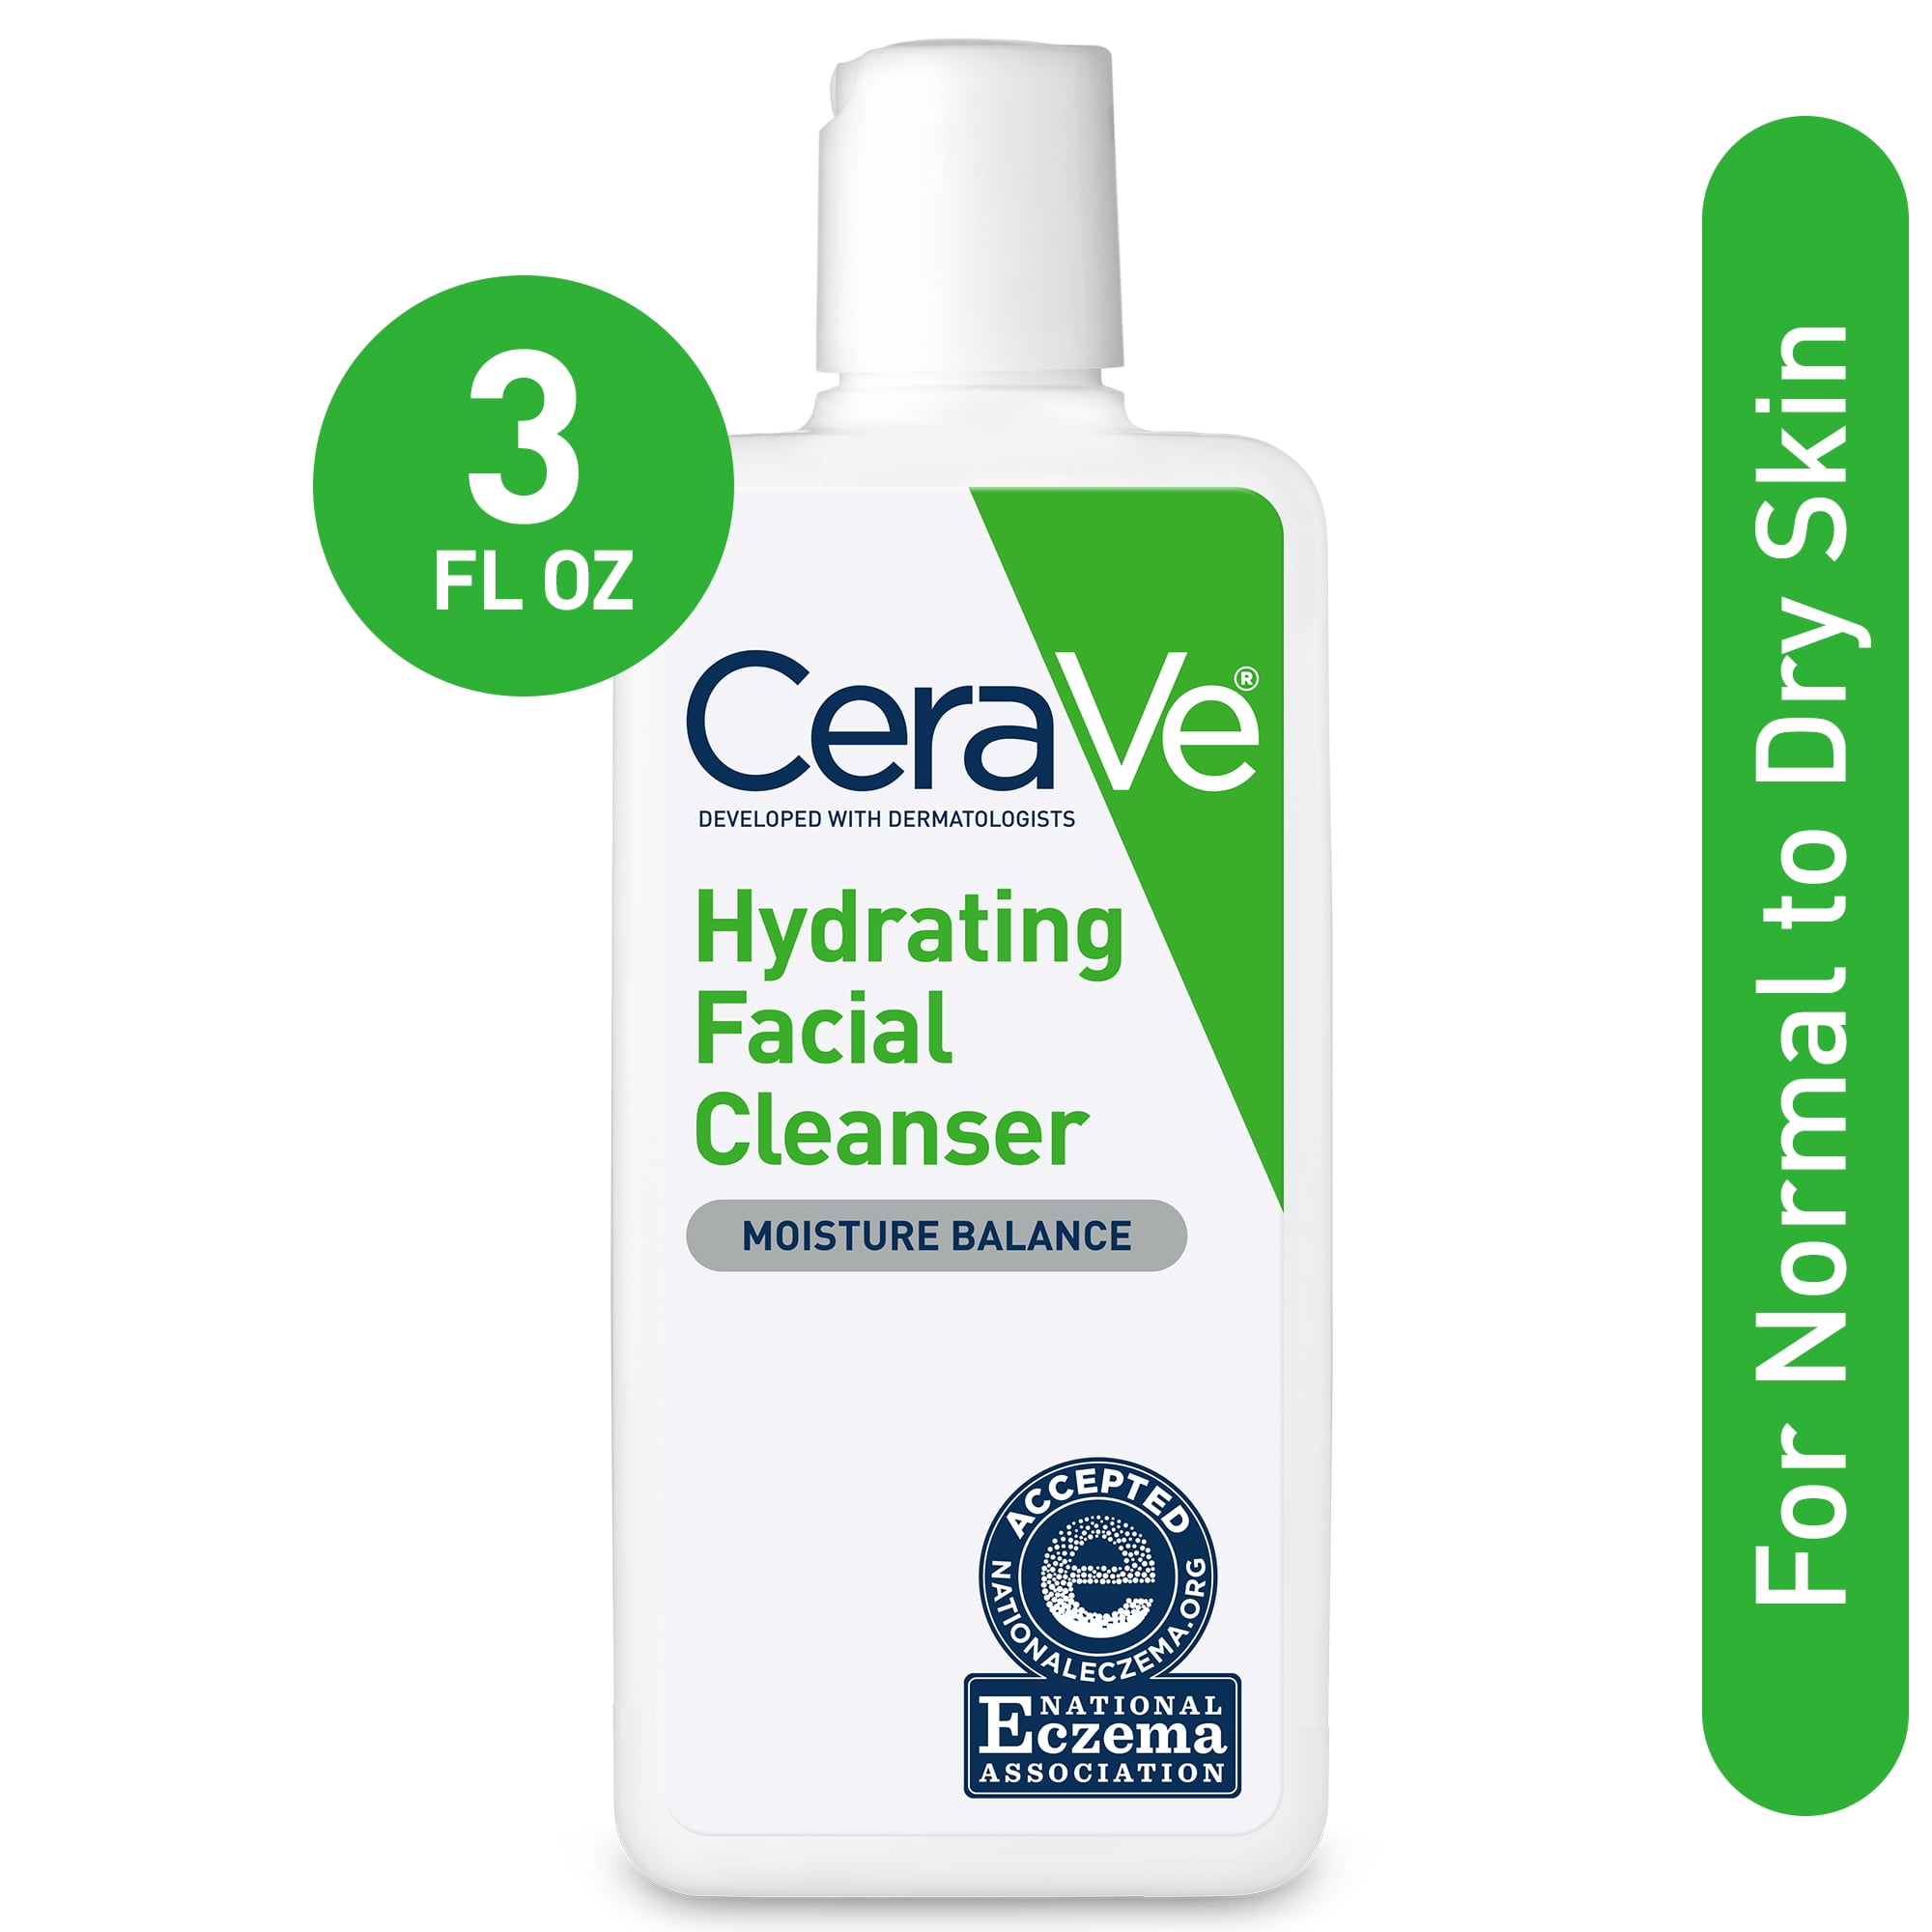 CeraVe Hydrating Facial Cleanser, Daily Face Wash Lebanon